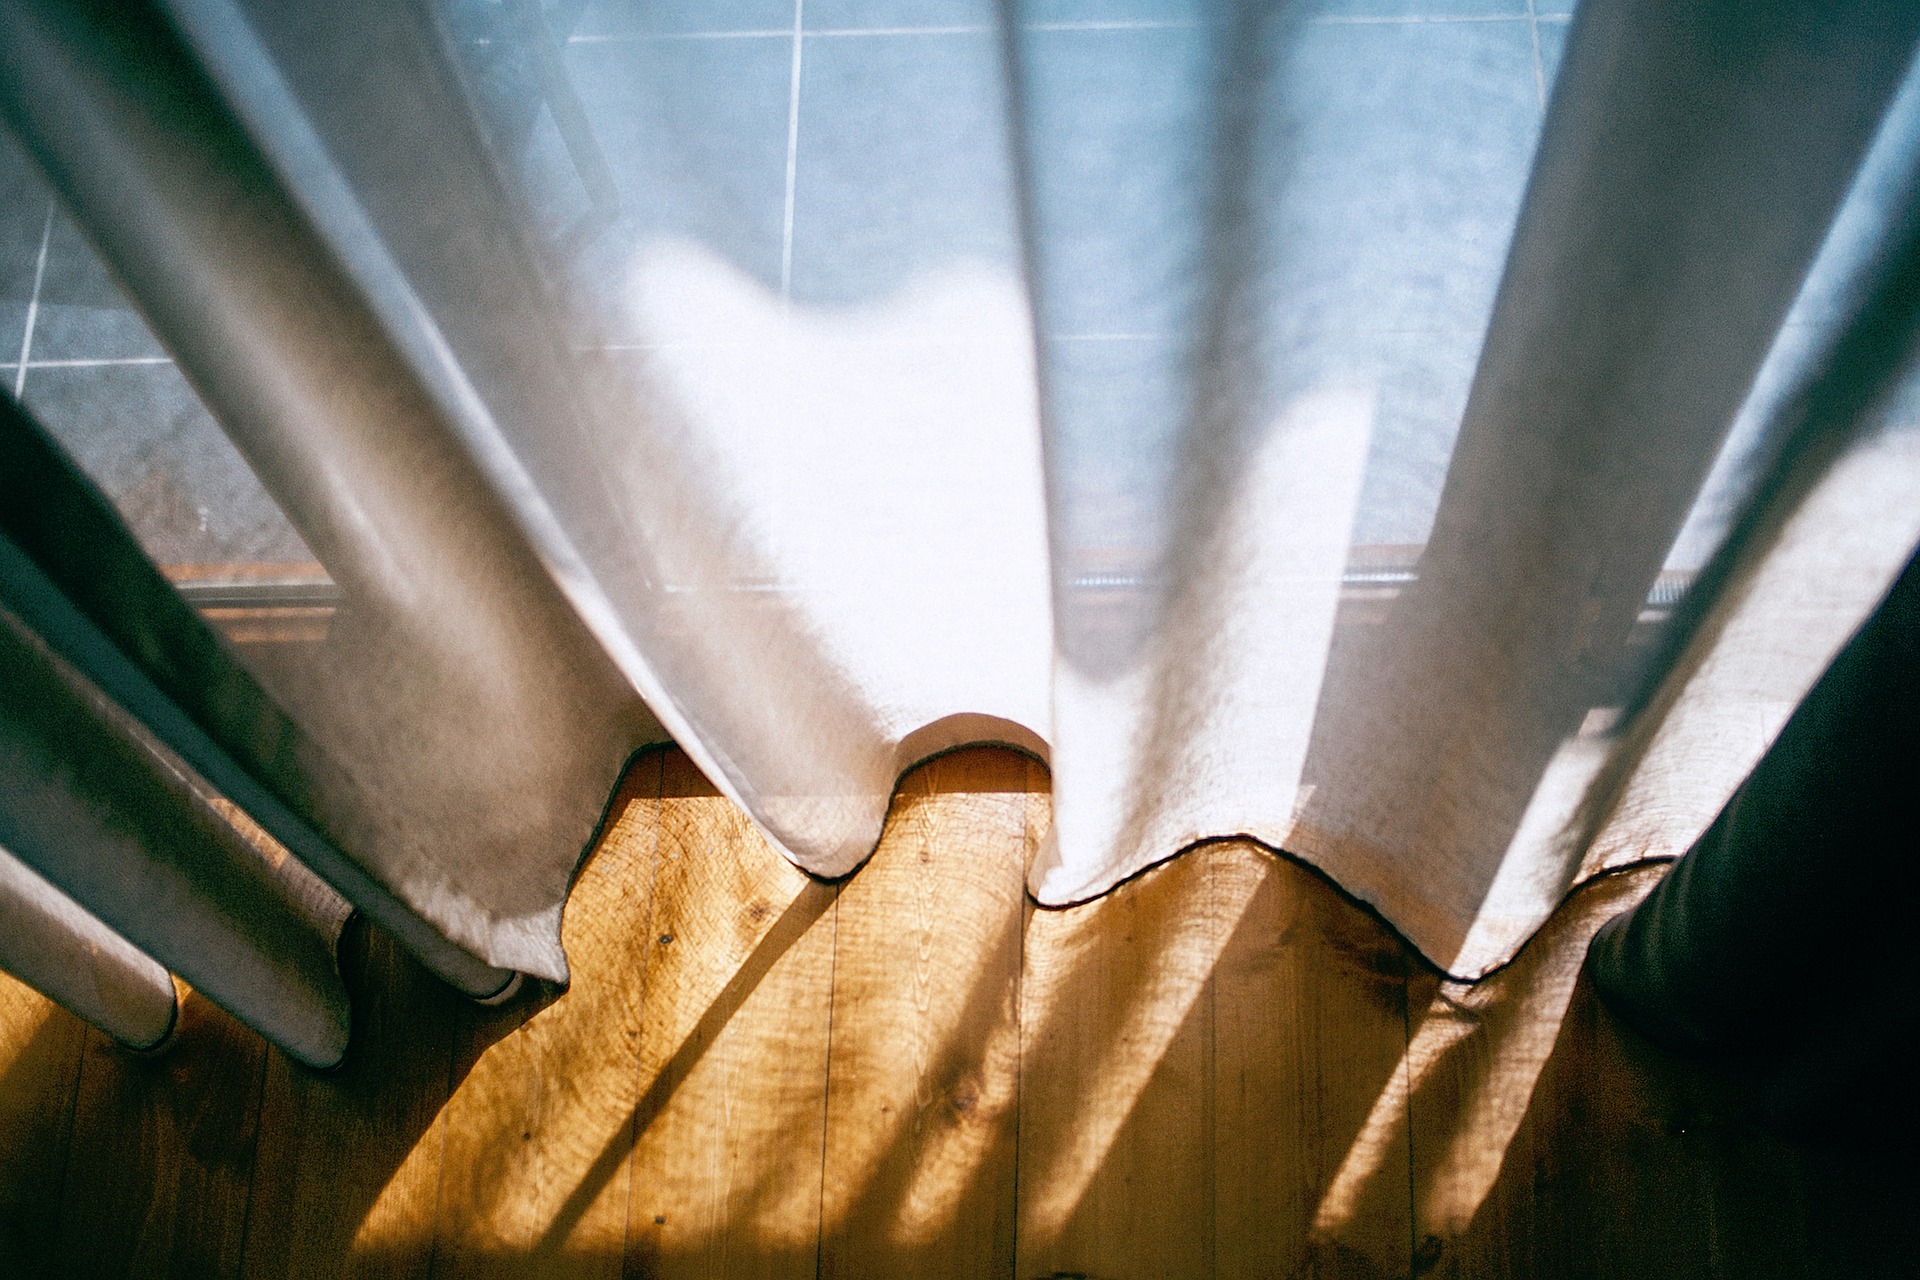 A light, white cotton curtain through which sunshine and light shine, reflecting on a wooden floor.